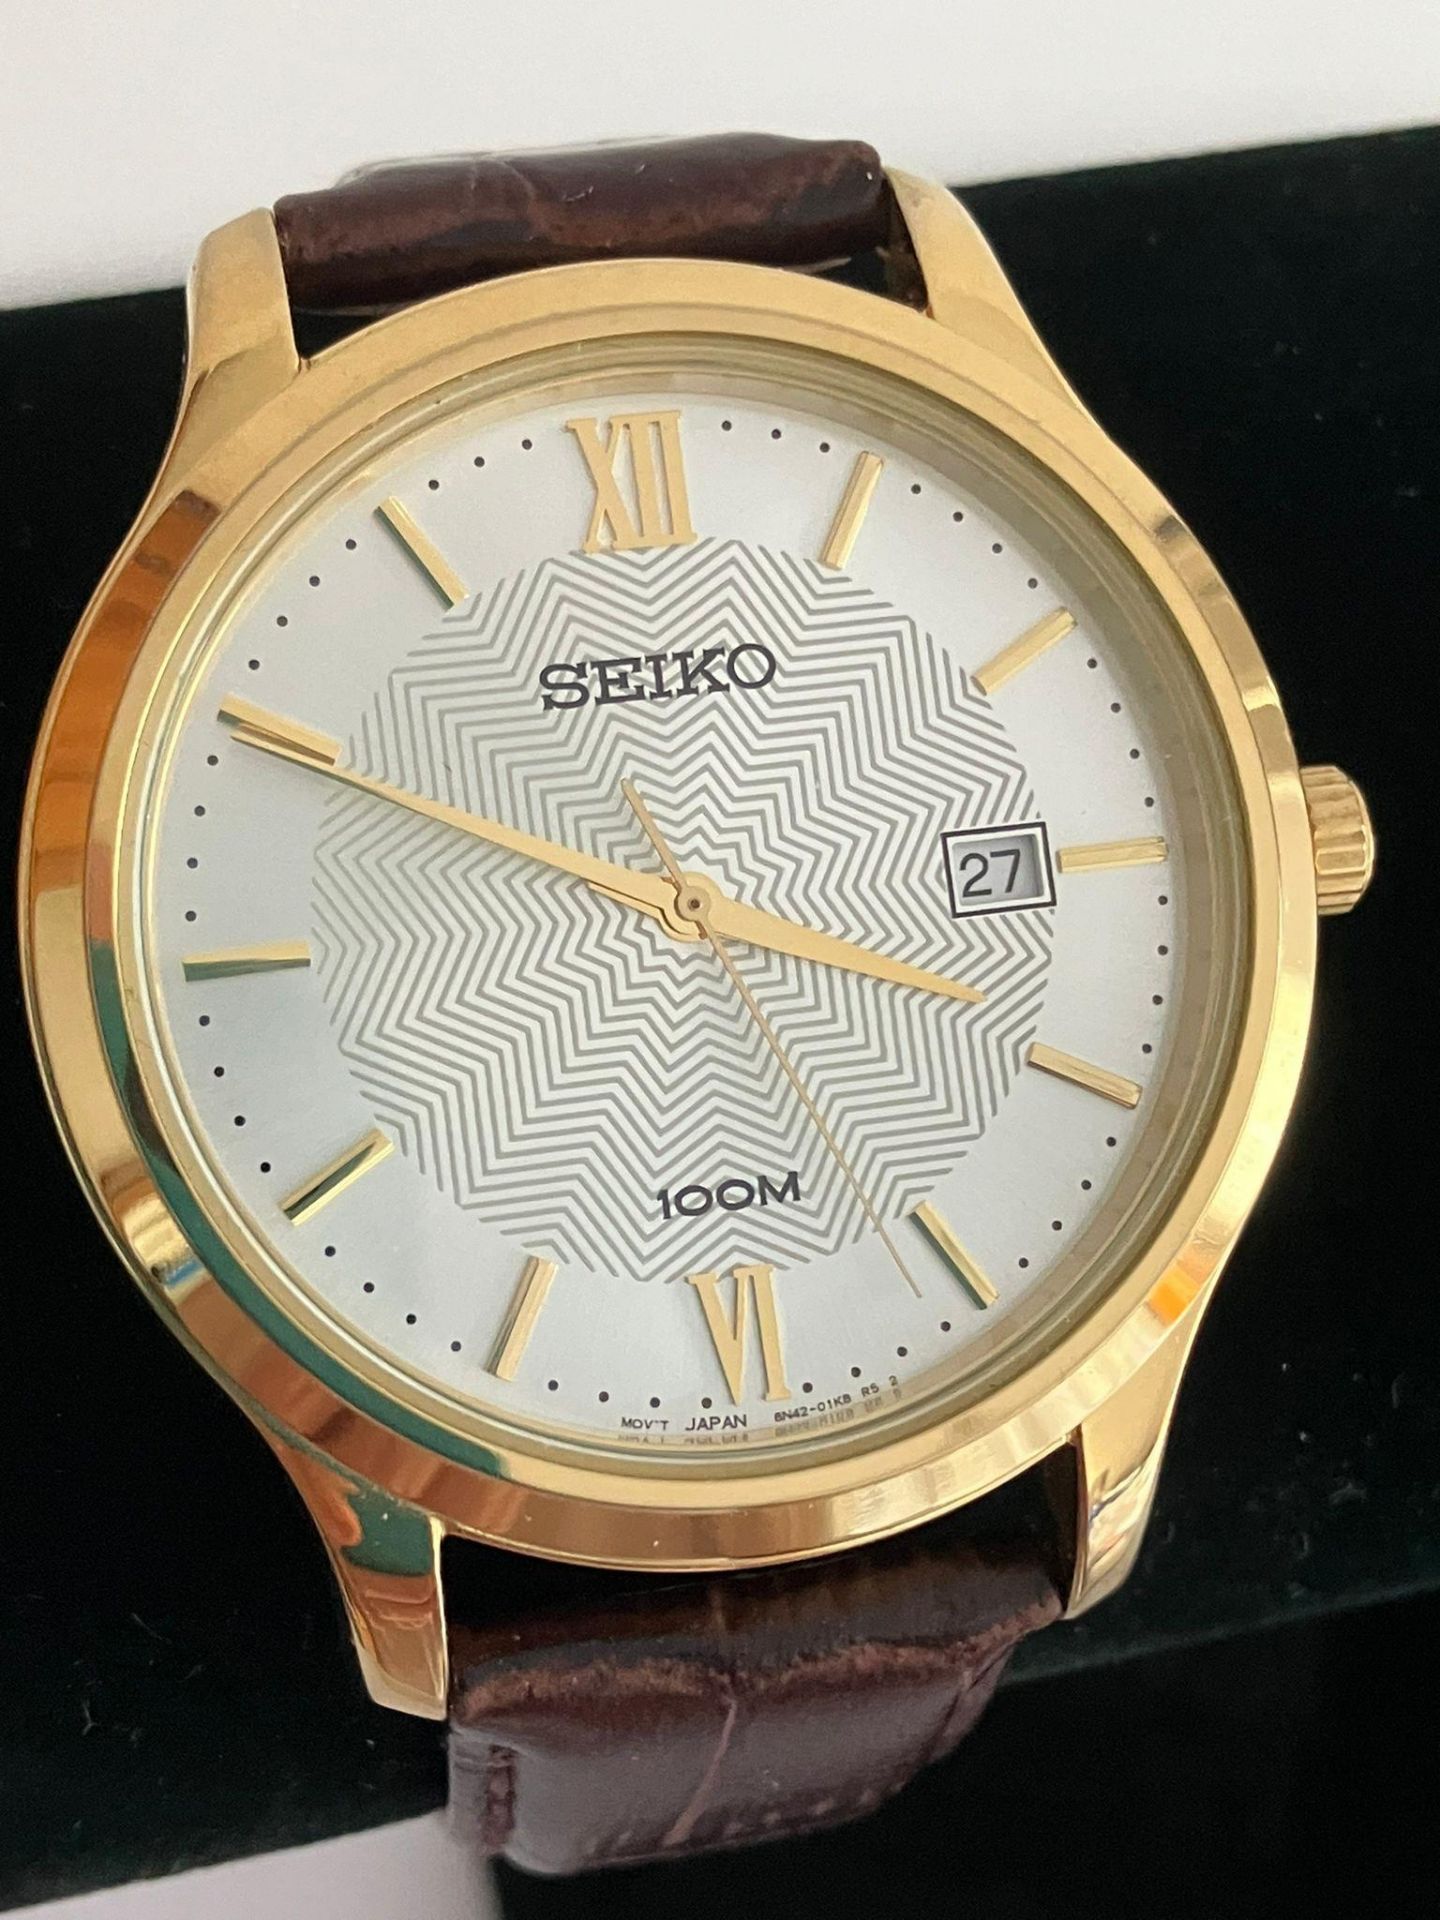 Gentlemans SEIKO QUARTZ WRISTWATCH Model GN42 01K8. Finished in gold tone with sweeping second